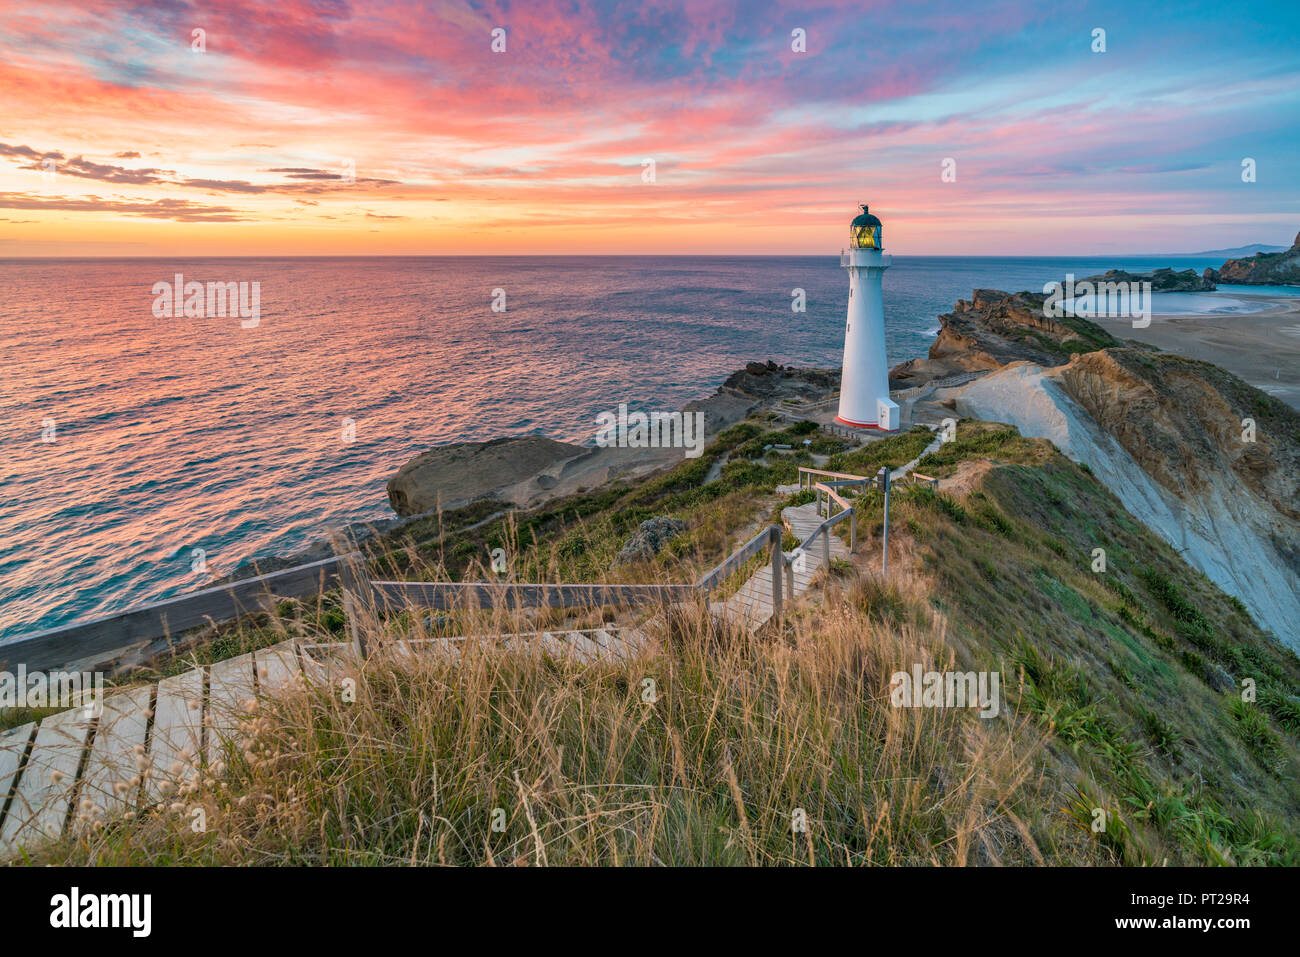 Castlepoint lighthouse at dawn, Castlepoint, Wairarapa region, North Island, New Zealand, Stock Photo